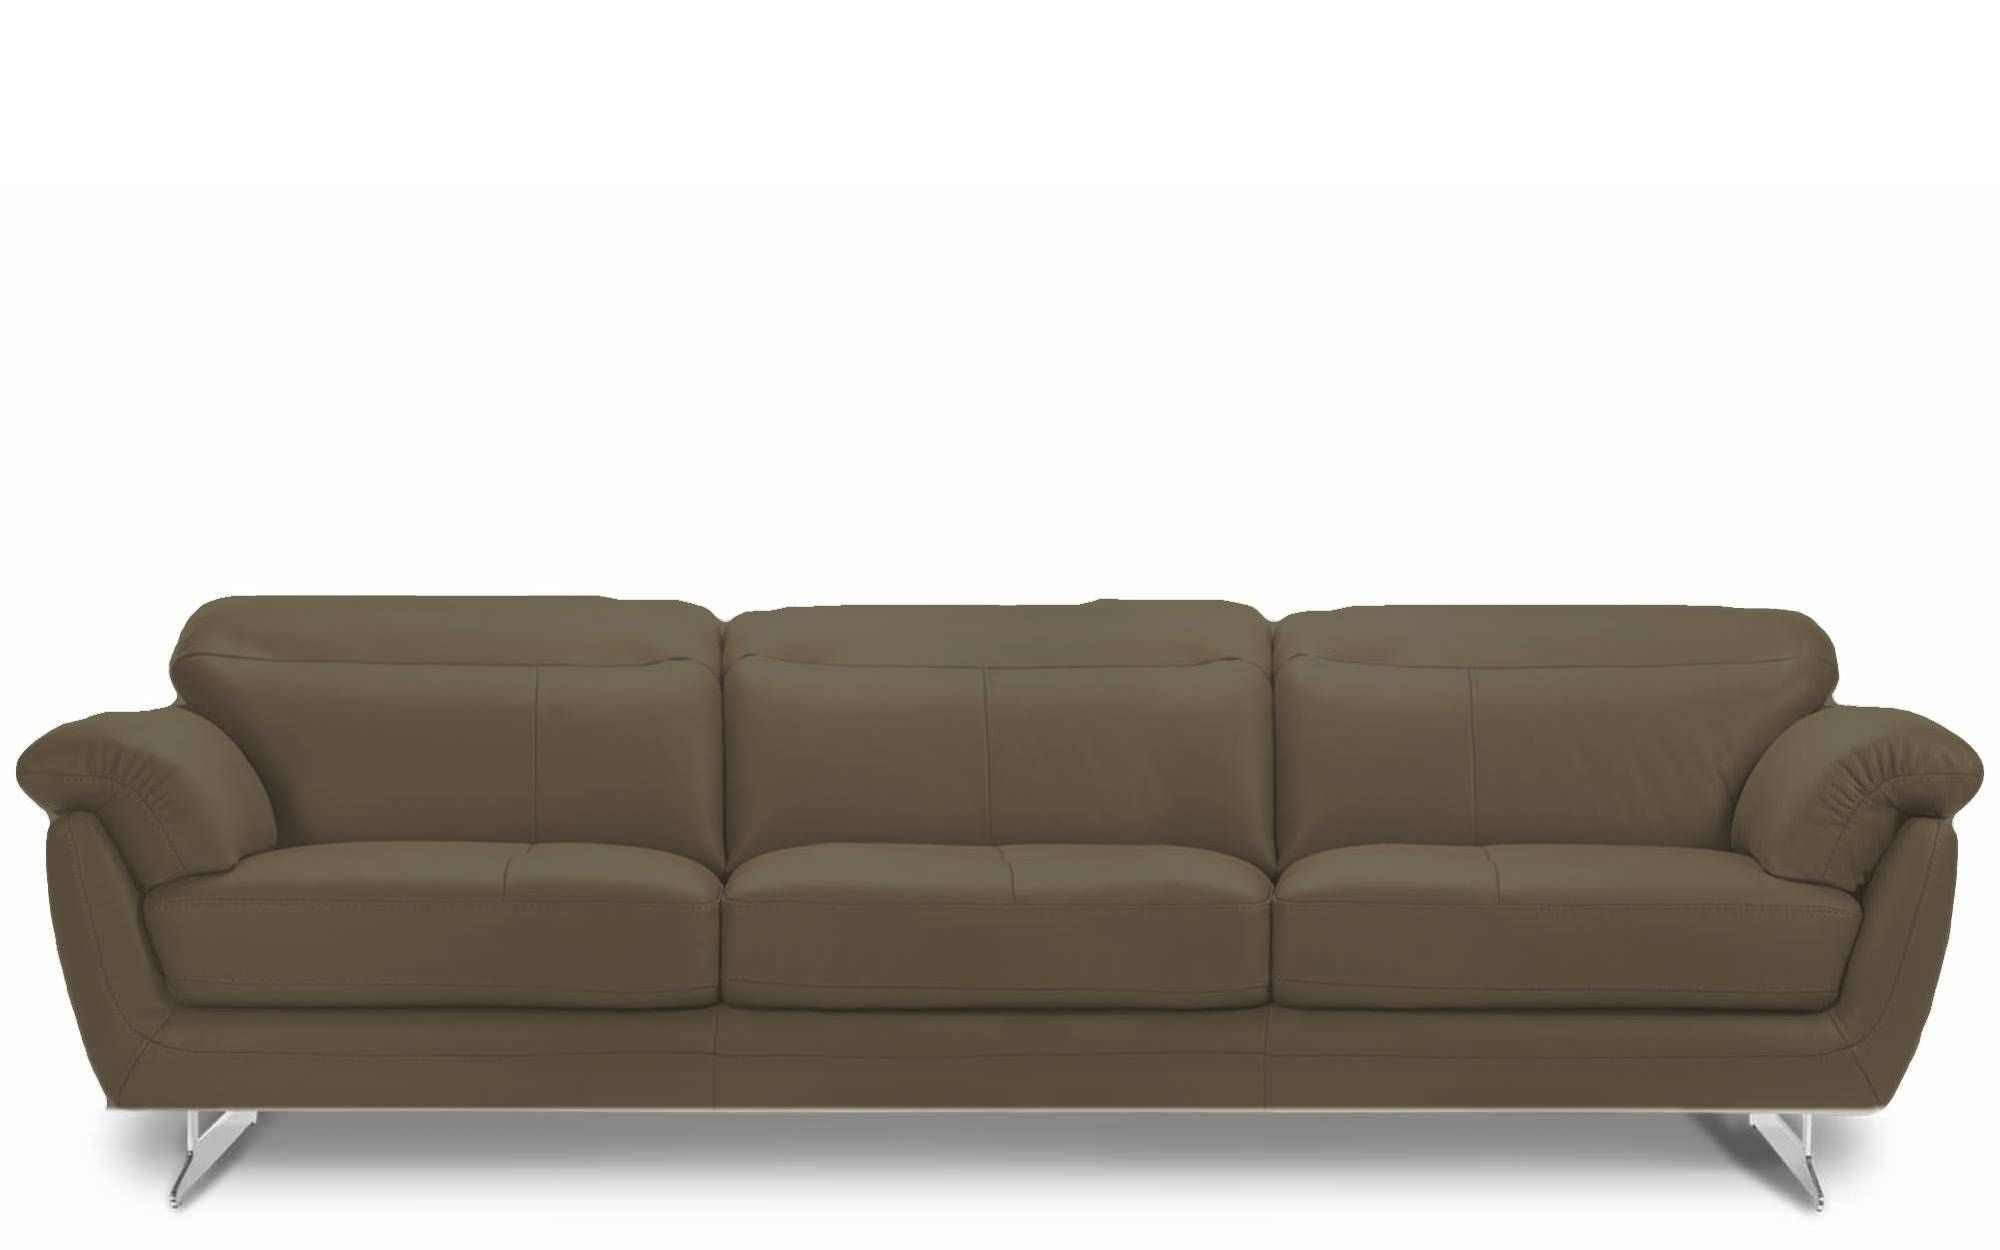 Rom Barbados 3 Seater Leather Sofa | Buy At Kontenta With Regard To 3 Seater Leather Sofas (View 22 of 30)